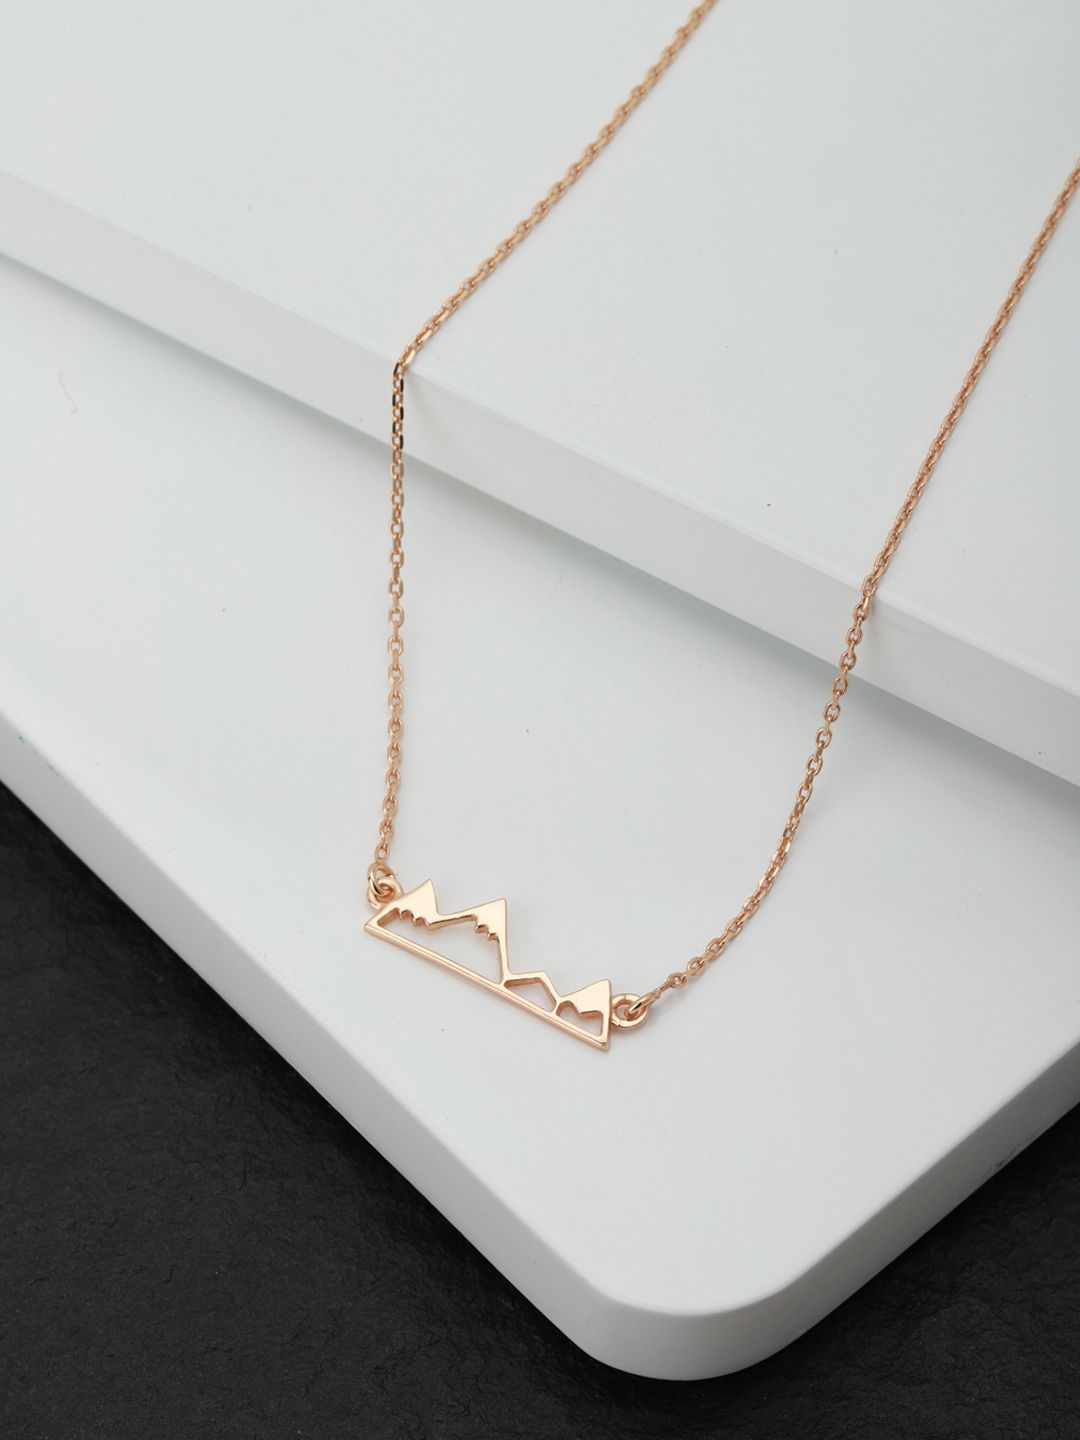 Carlton London Gold-Plated Minimal Necklace Price in India